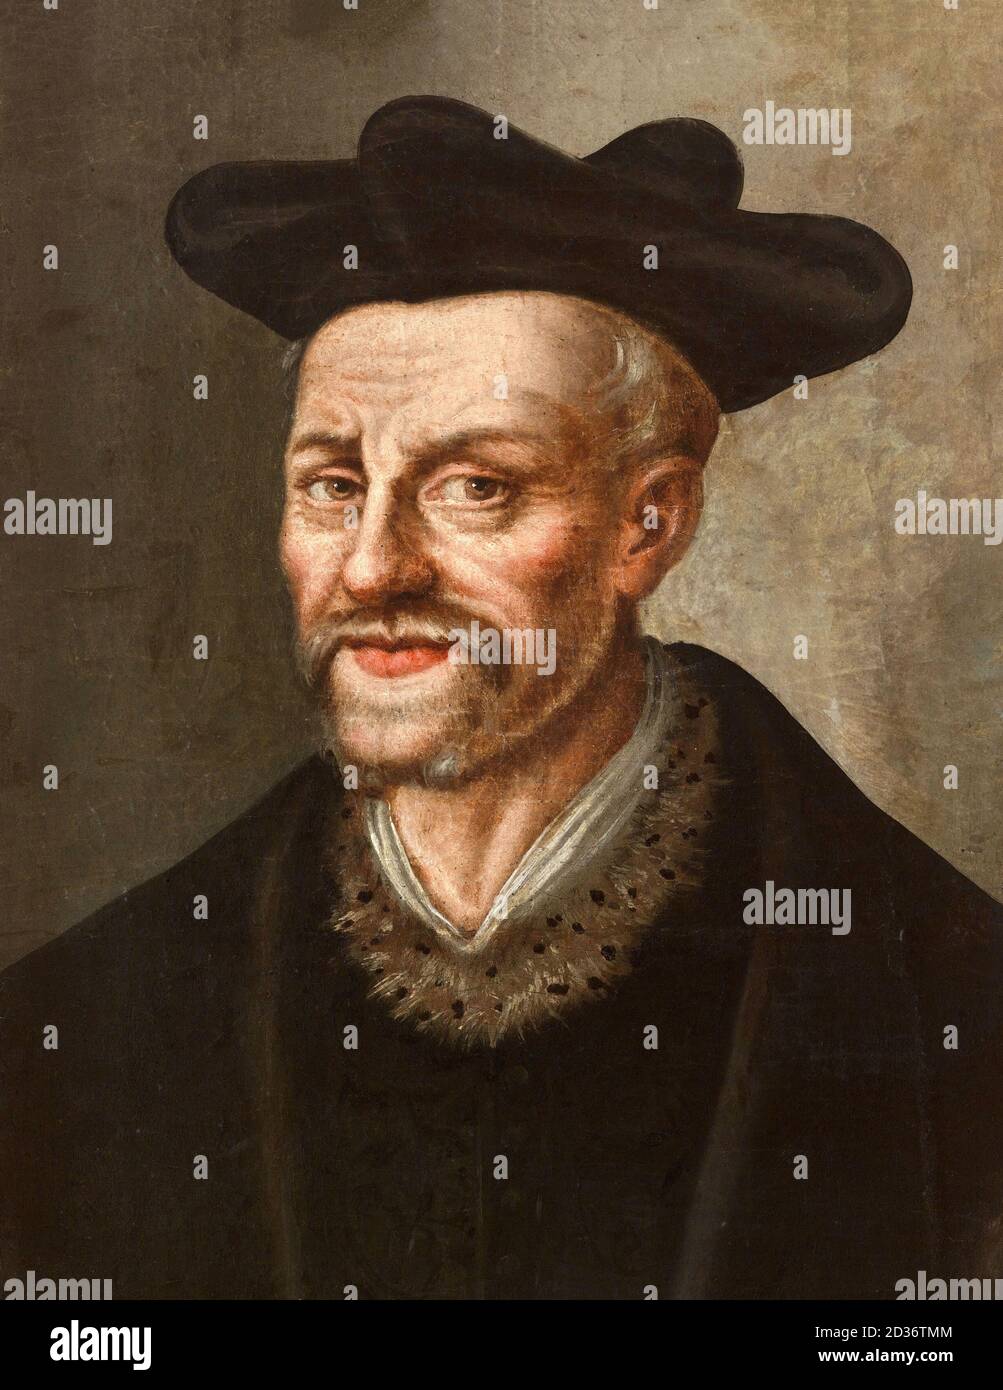 Rabelais. Portrait of the French writer and physician, François Rabelais (c.1483/1494-1553), oil on canvas, 1600s Stock Photo